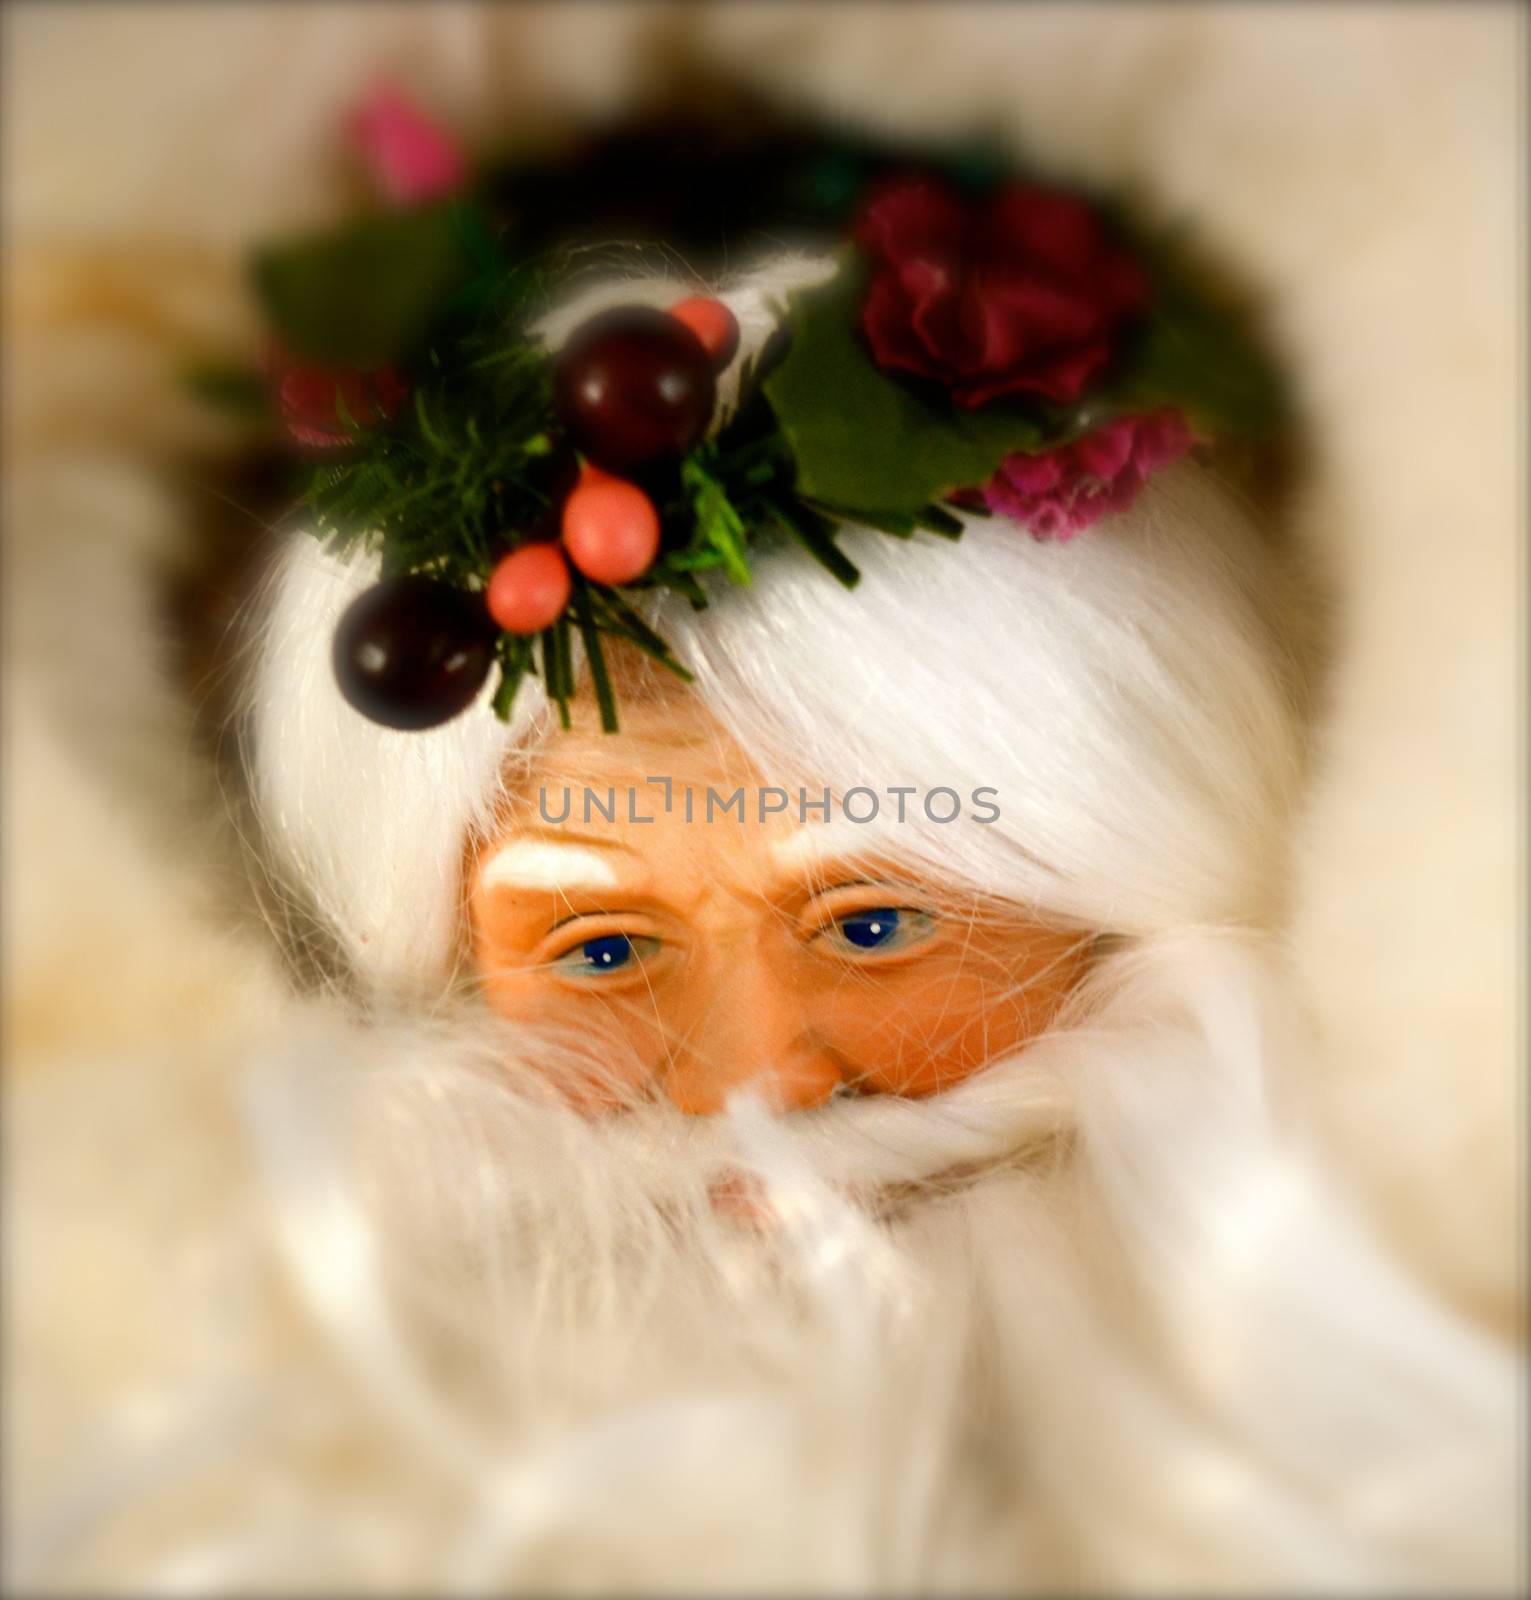 Santa Claus stares out from behind beard